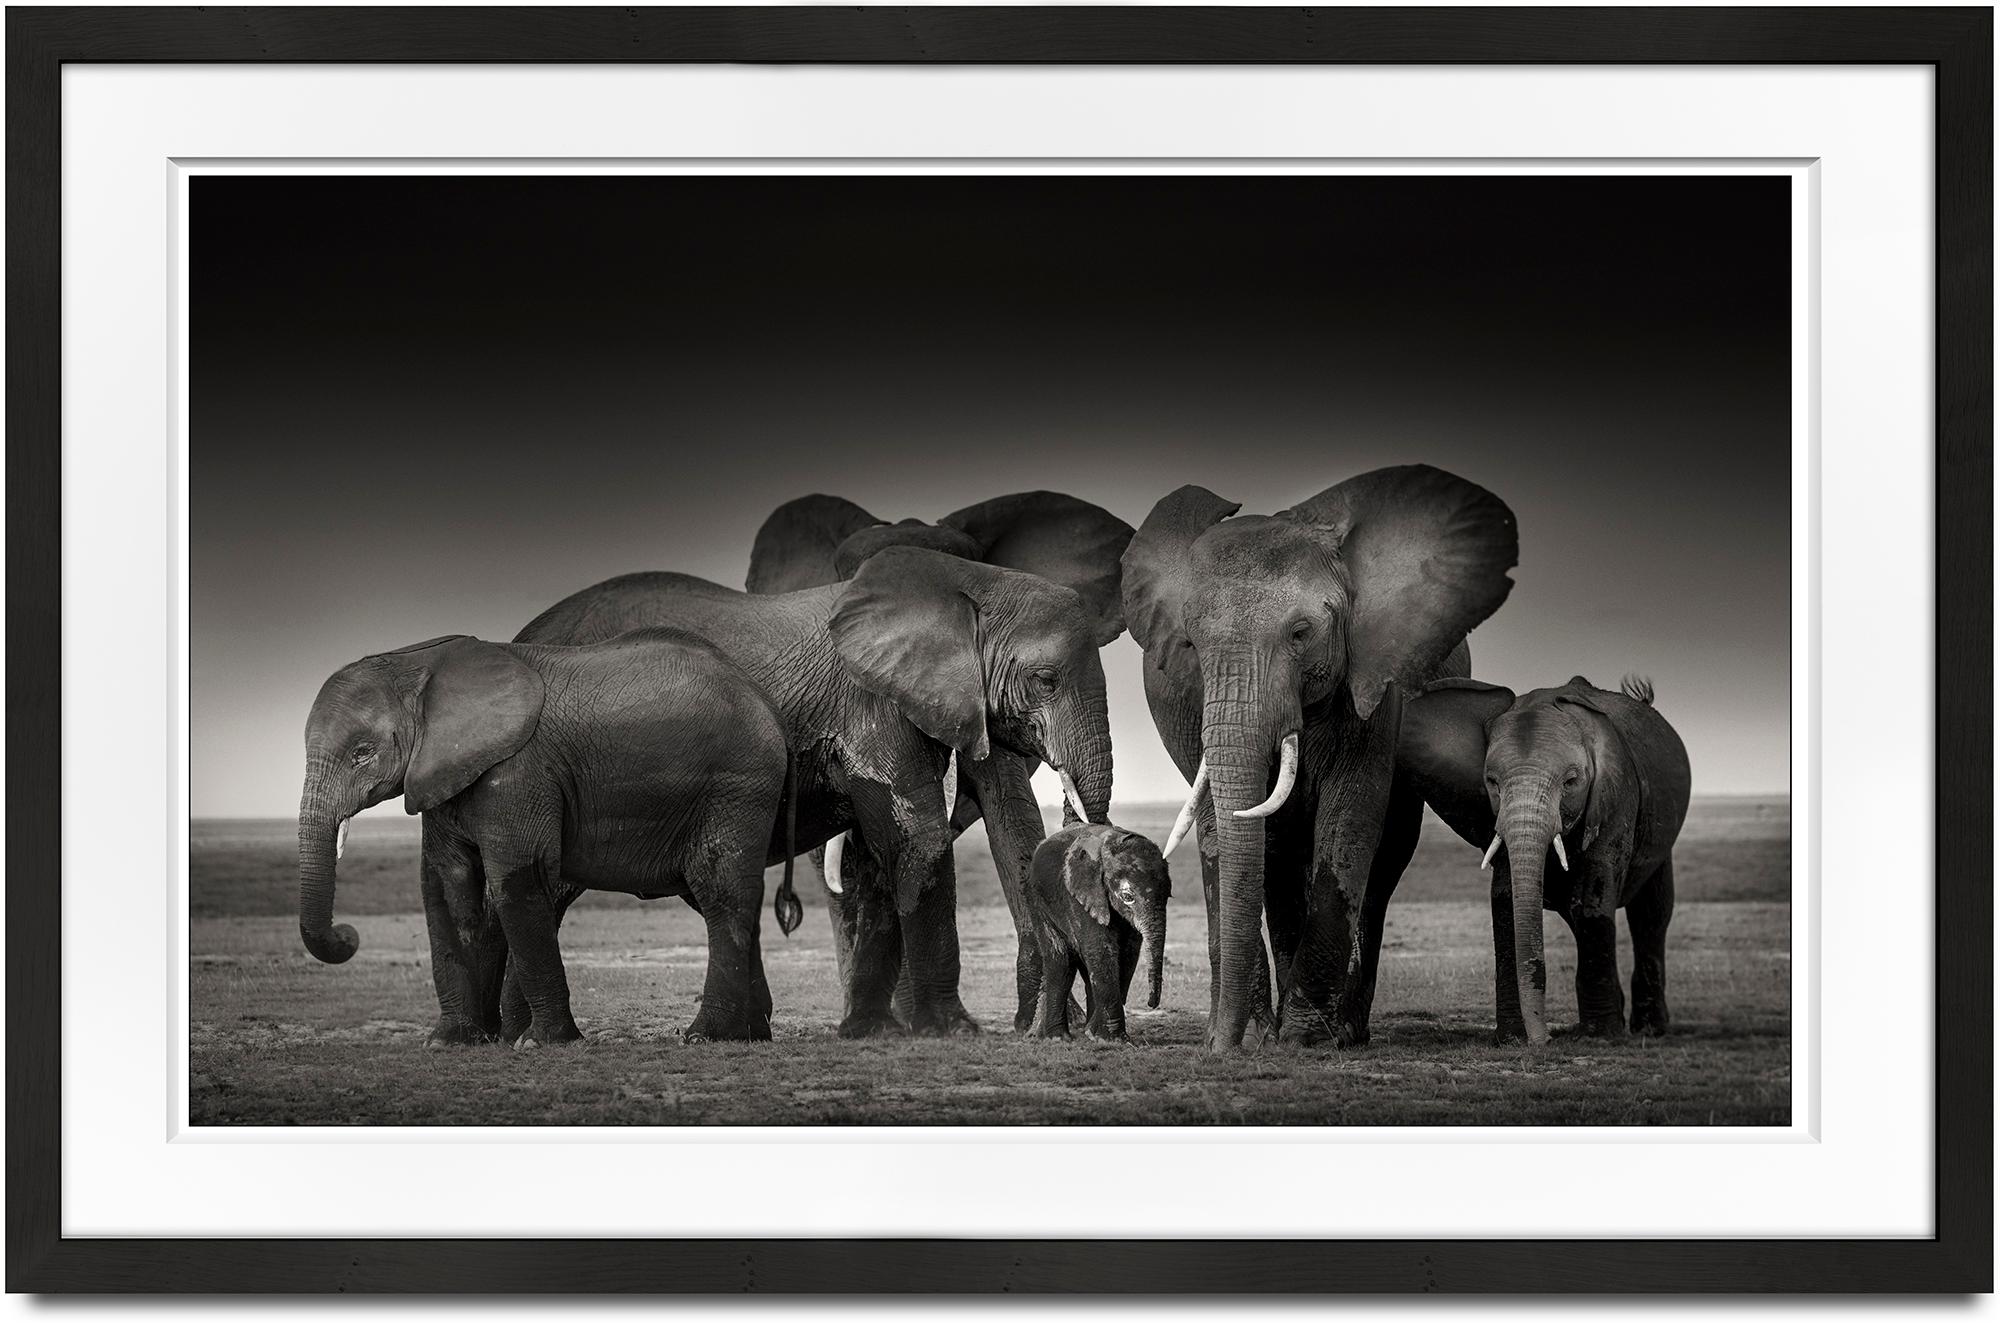 Elephant family in Amboseli, animal, wildlife, black and white photography - Photograph by Joachim Schmeisser